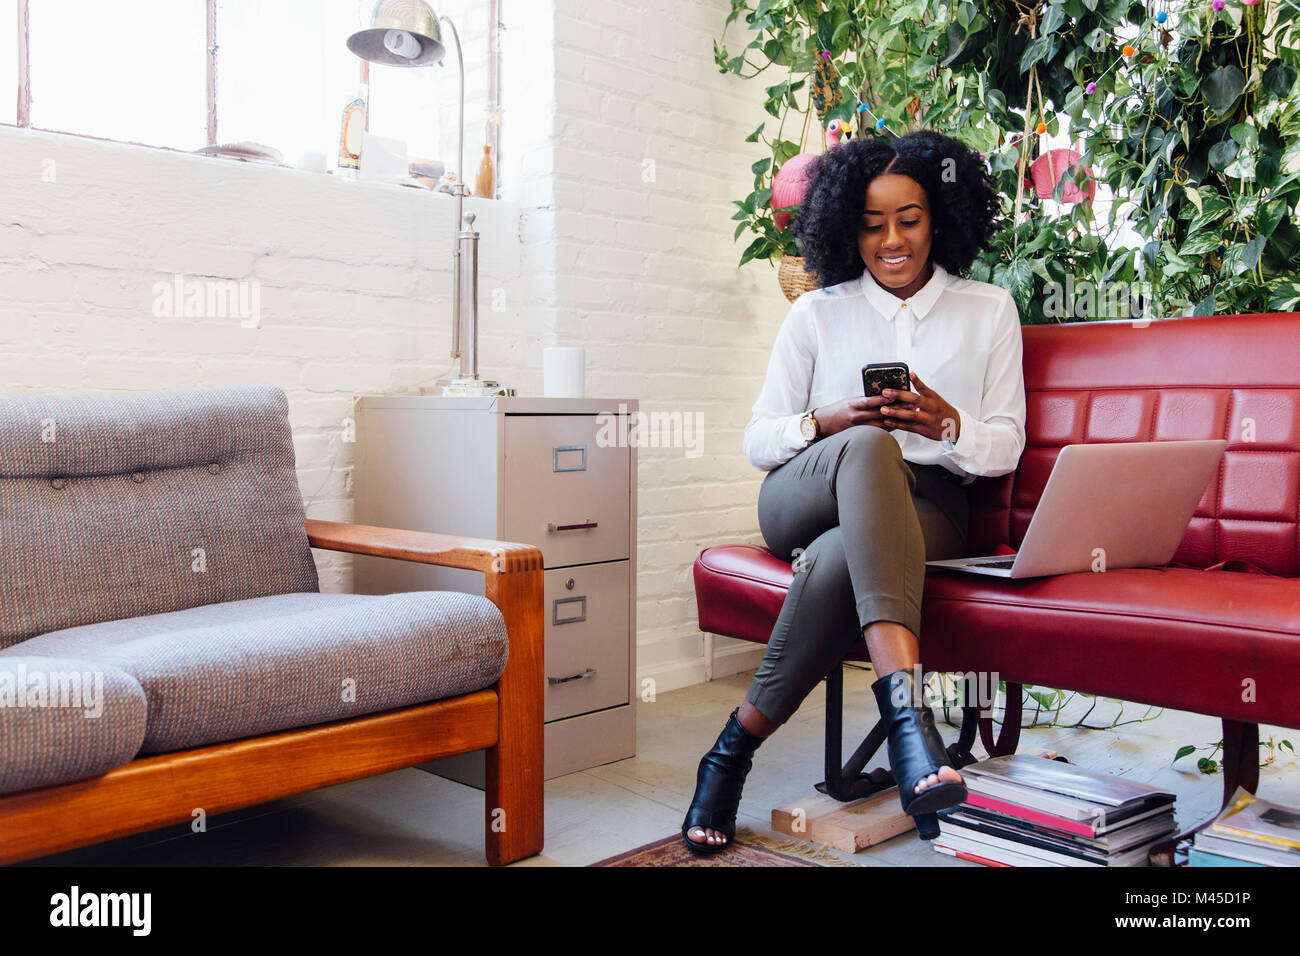 Woman in office sitting on sofa with laptop, texting on smartphone Stock Photo